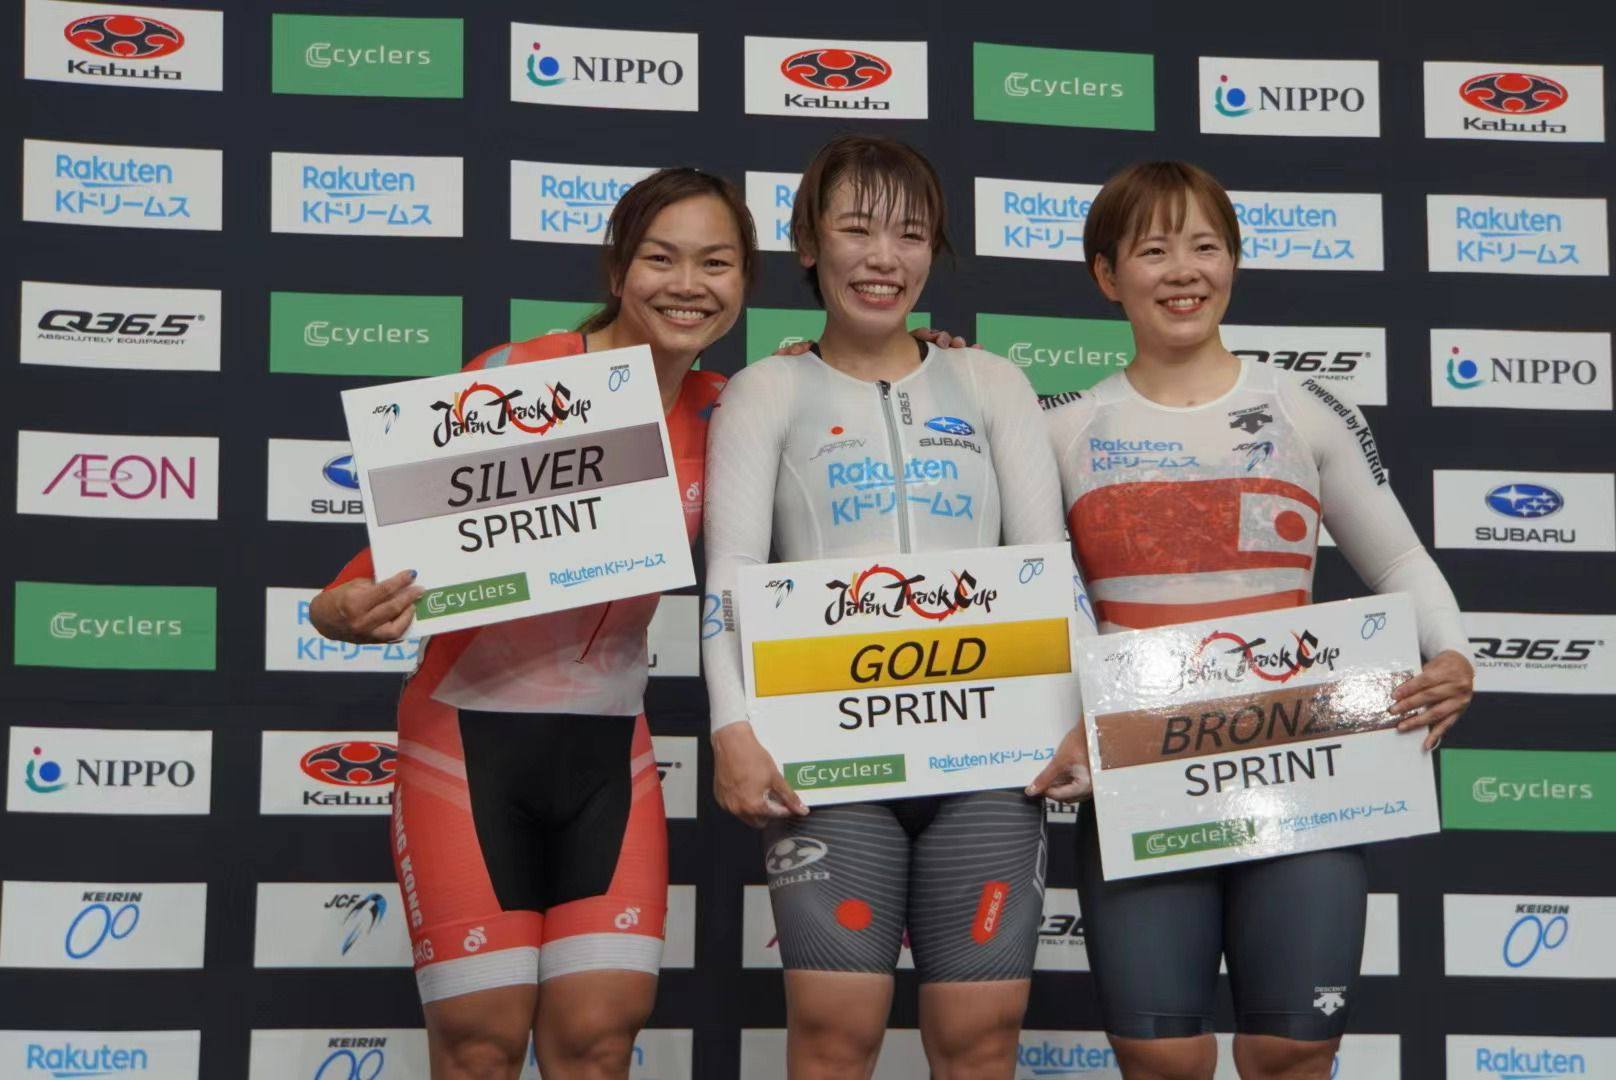 Sarah Lee (left) won another silver medal in the women’s sprint at the Japan Cup II on Saturday. Photo: Hong Kong Cycling Association

